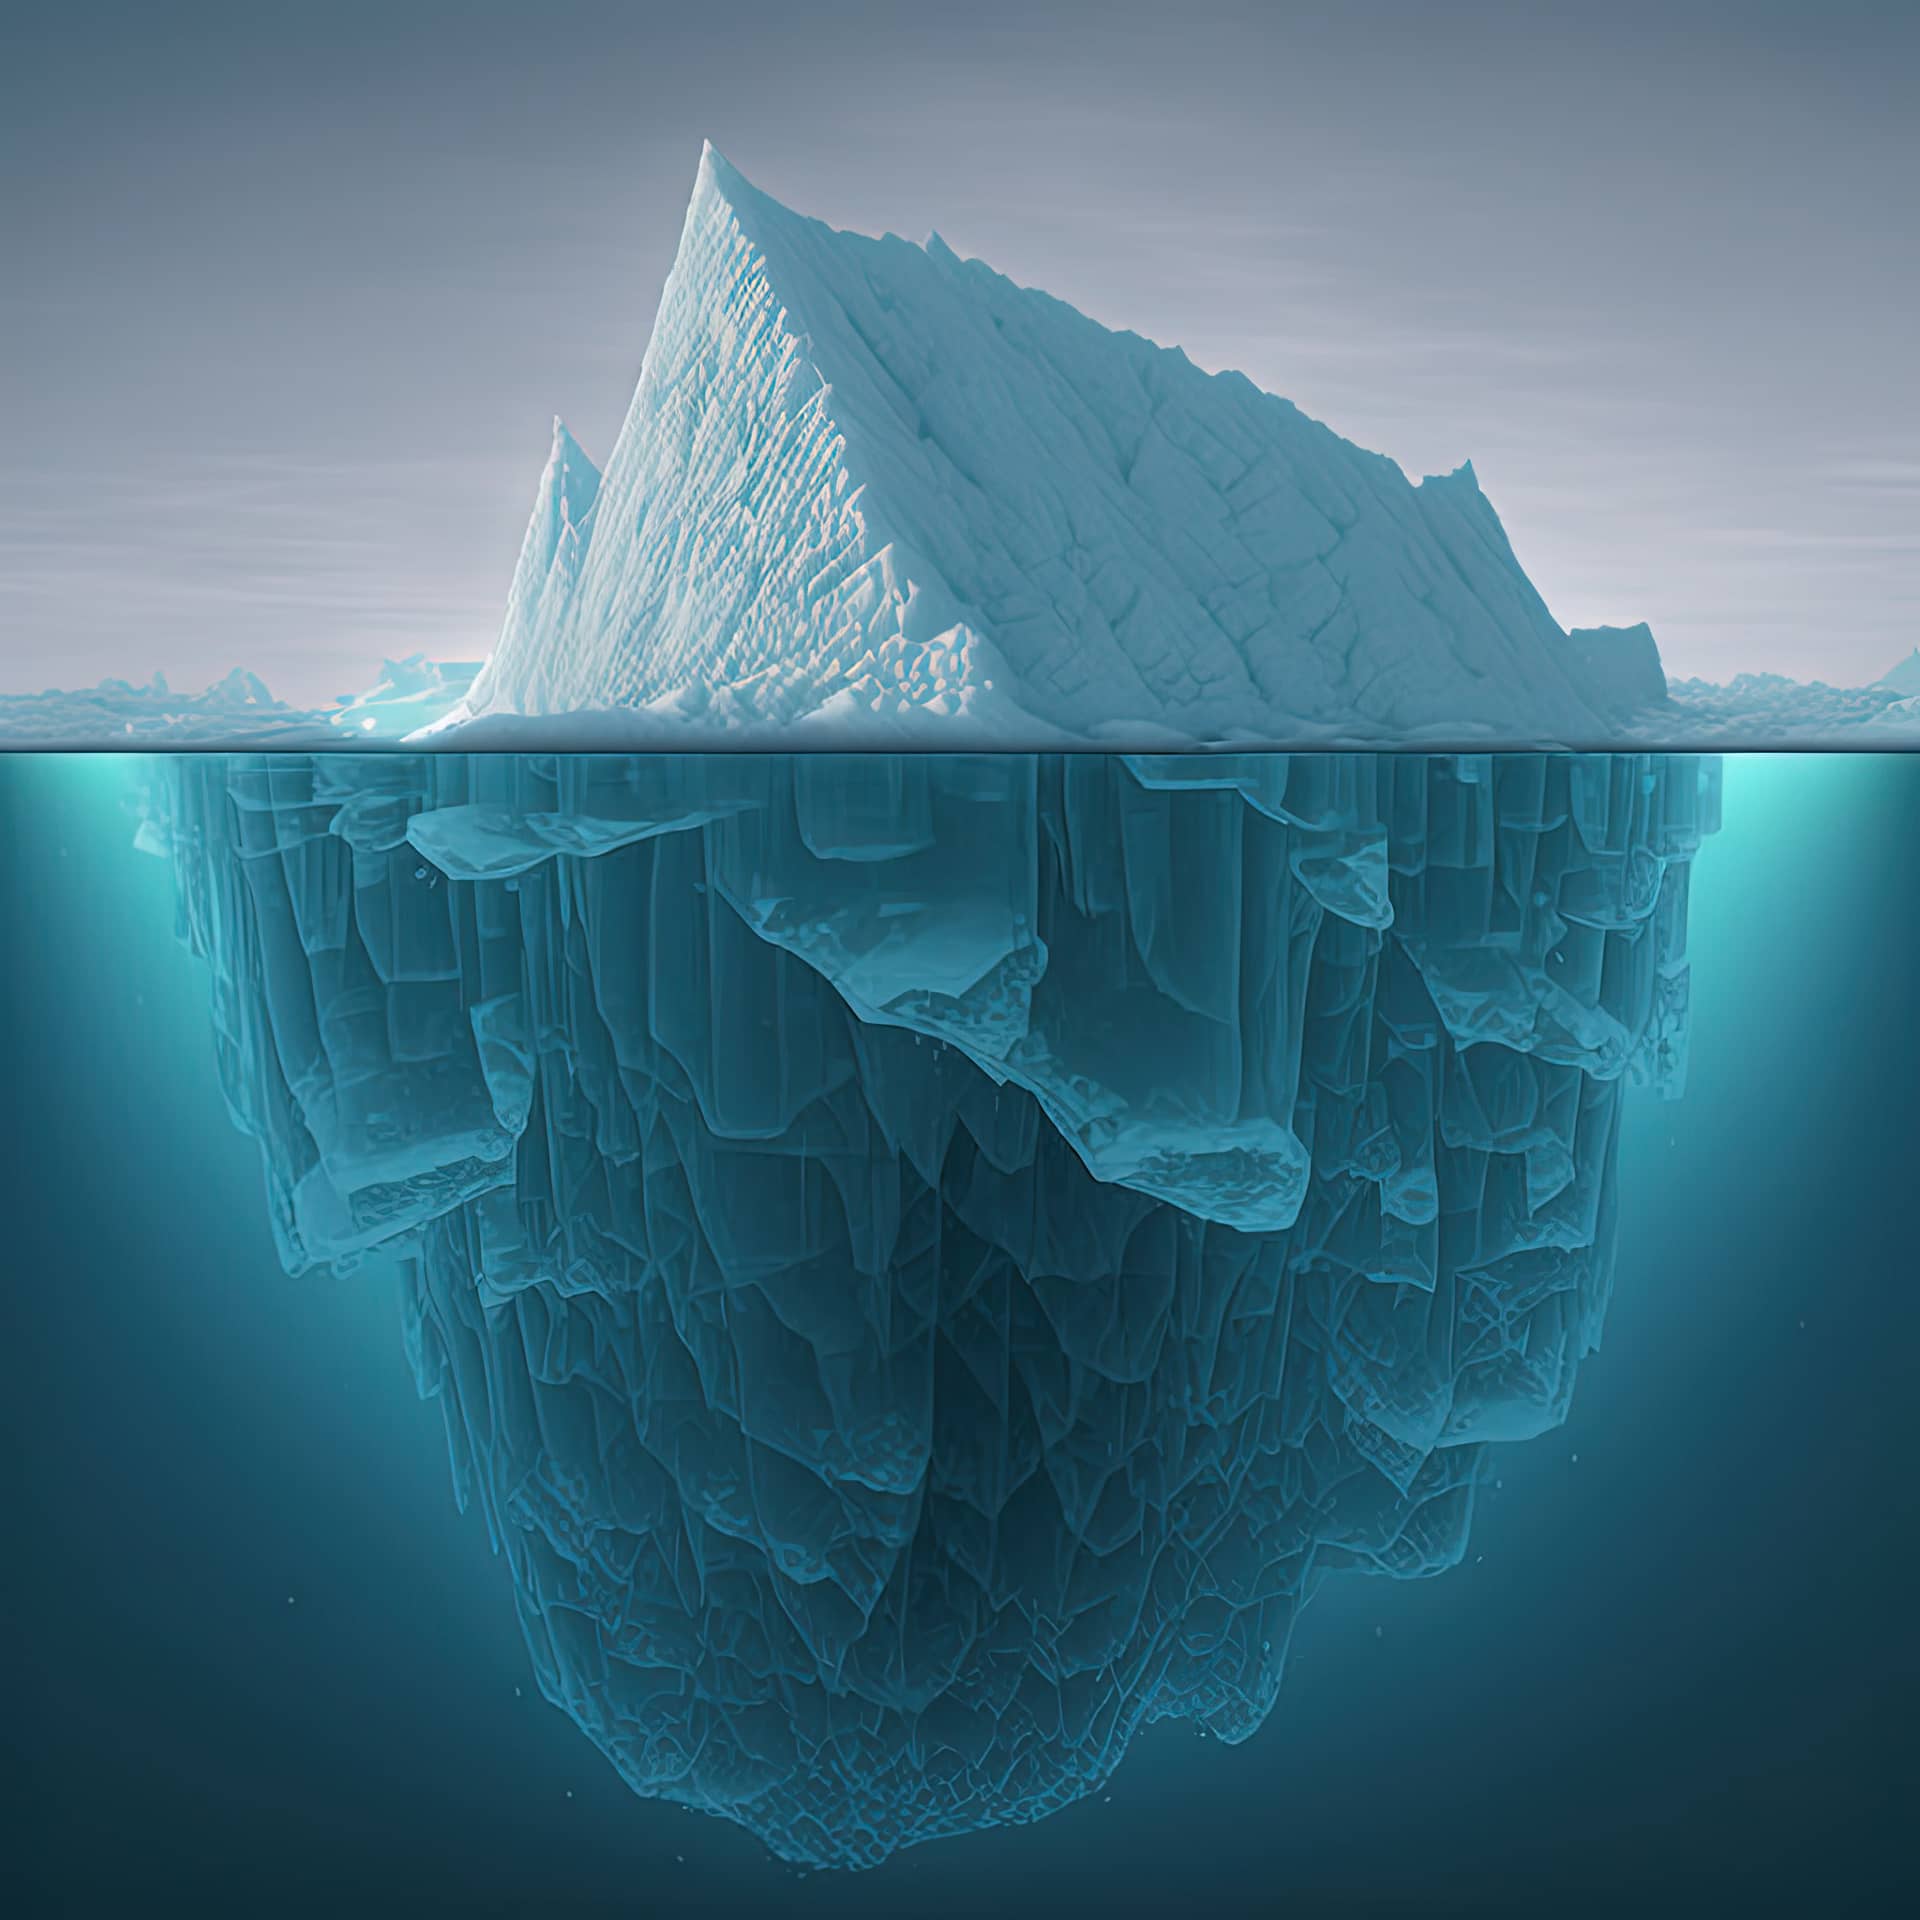 Iceberg middle ocean perfect clear blue water conservation ecology image